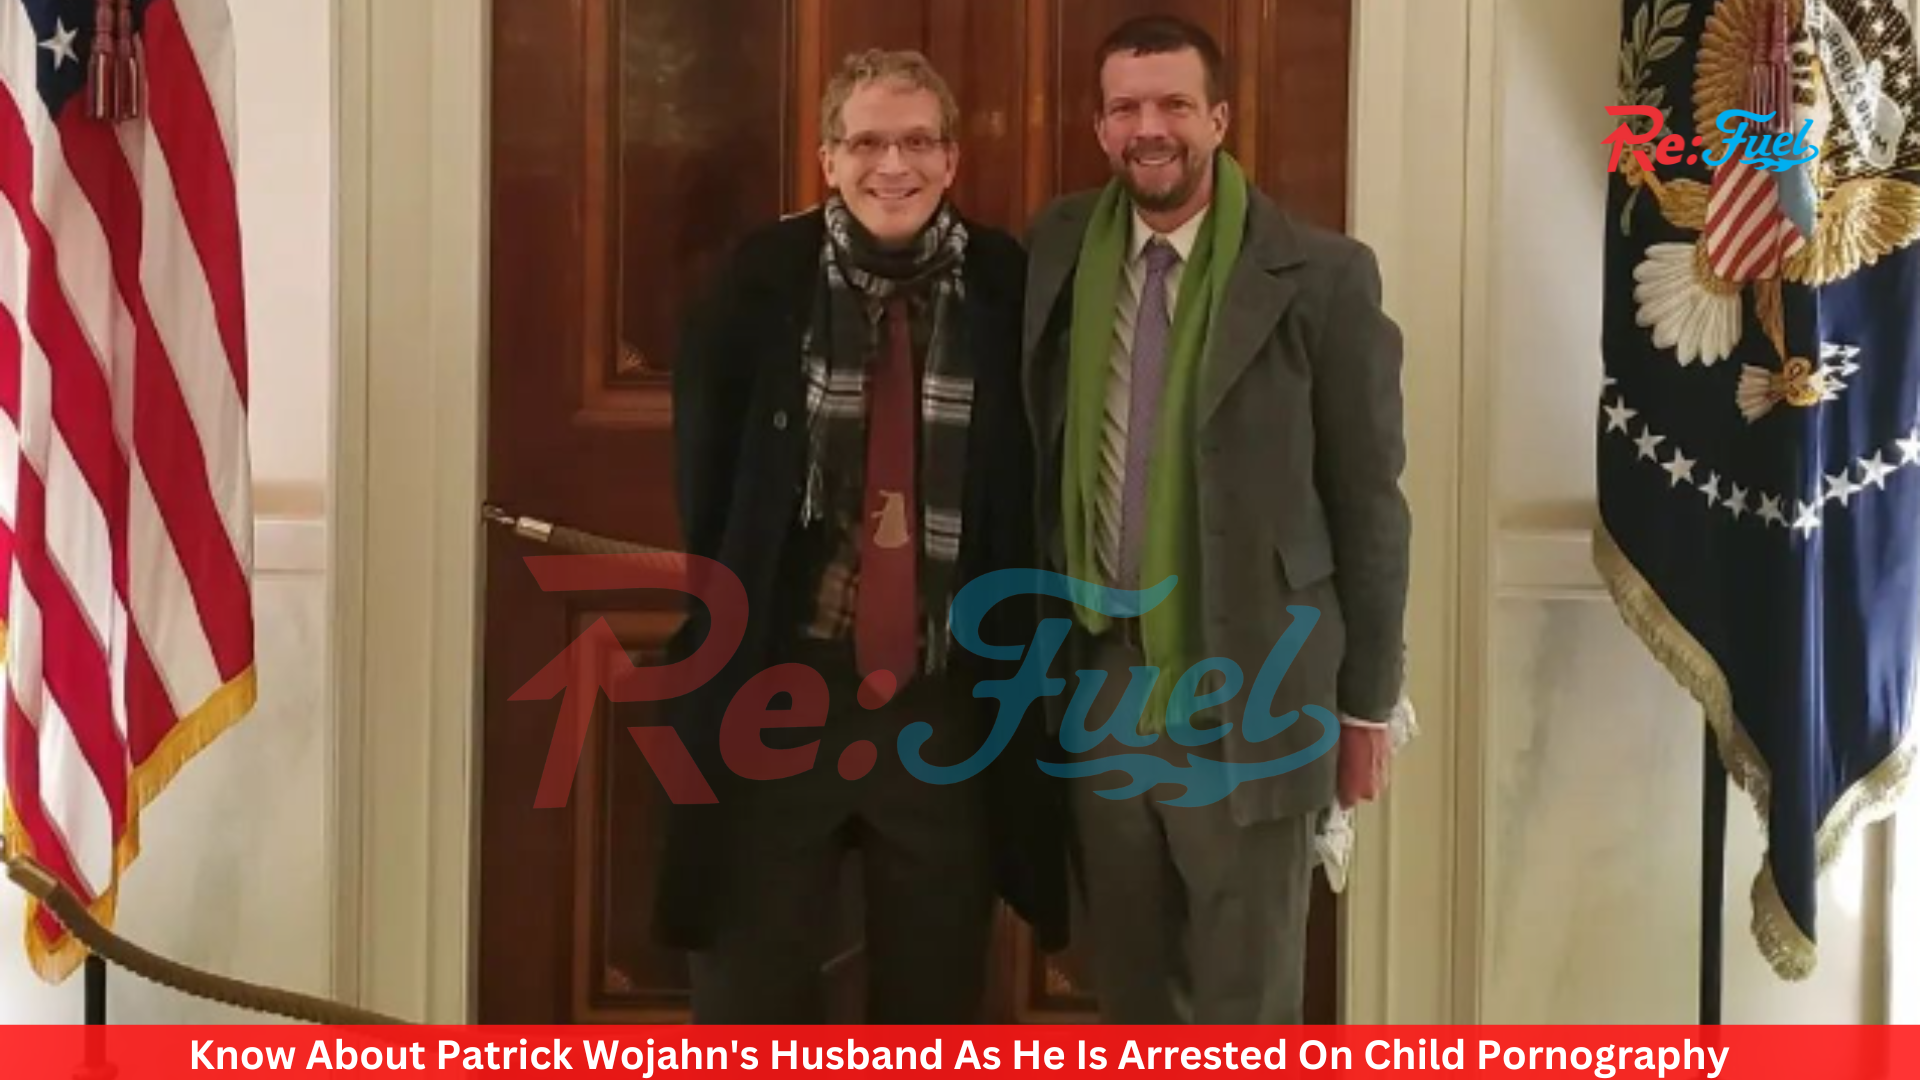 Know About Patrick Wojahn's Husband As He Is Arrested On Child Pornography